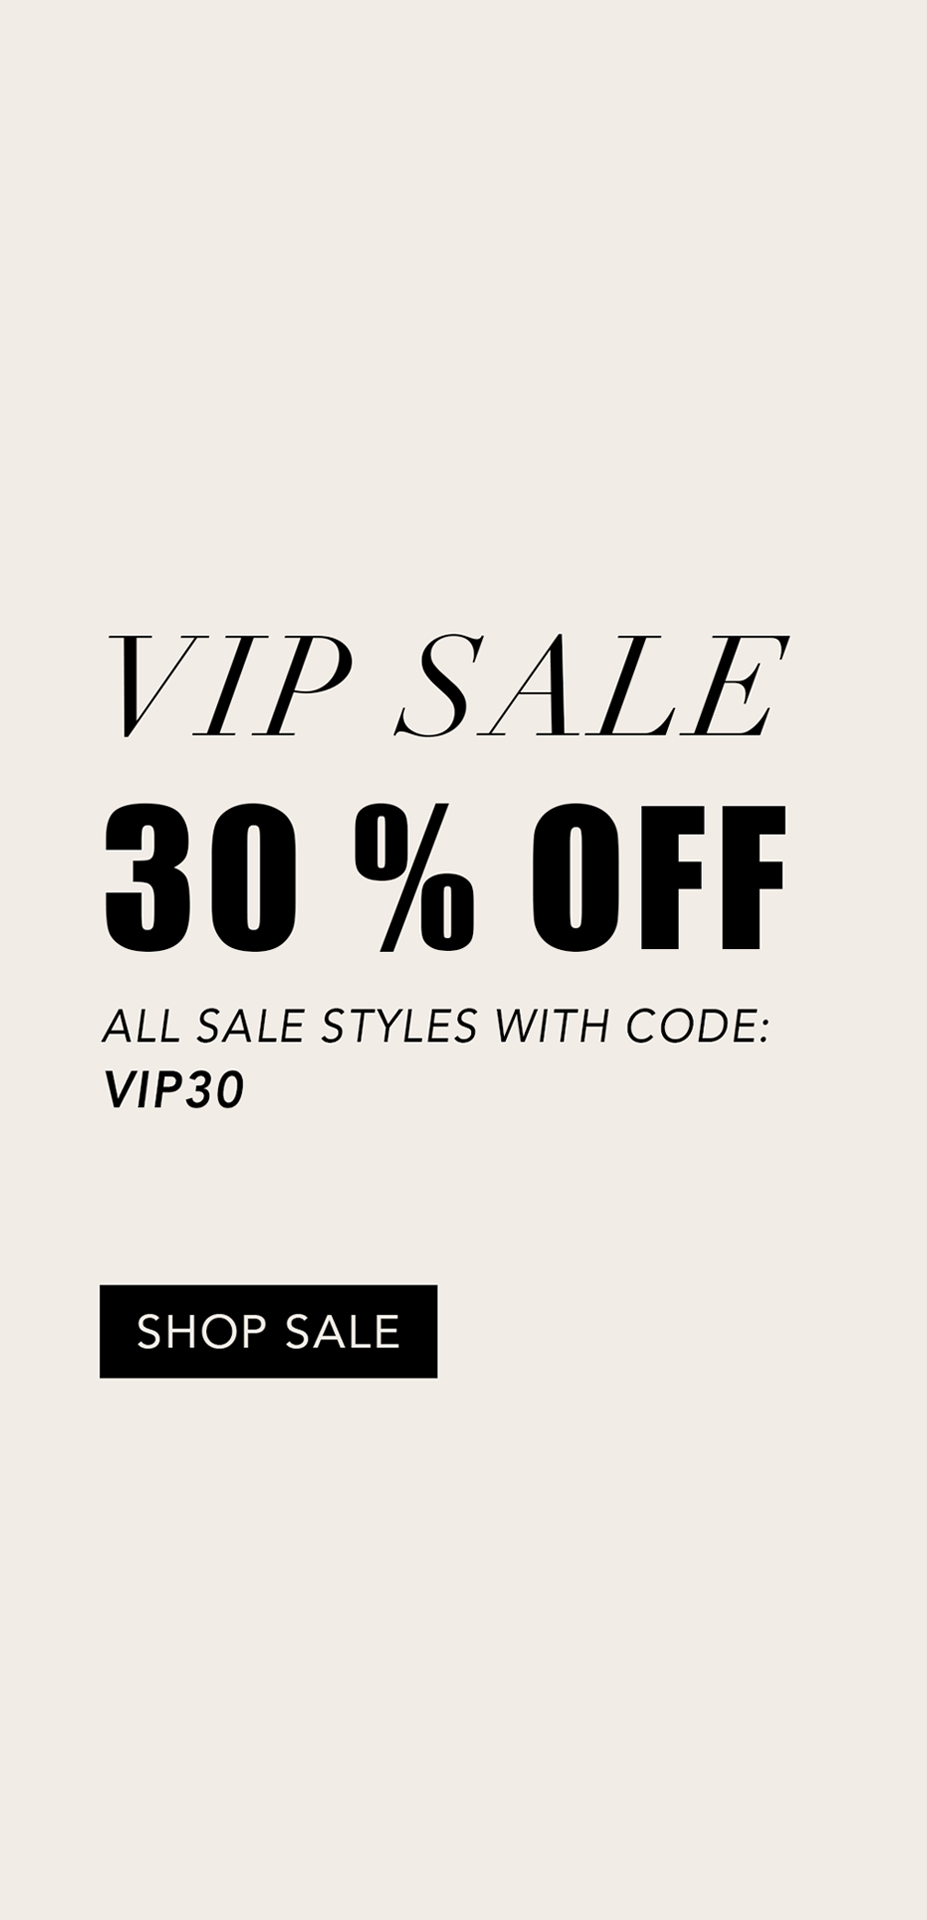 Shop the Endless Rose VIP Sale and take 30% Off select styles